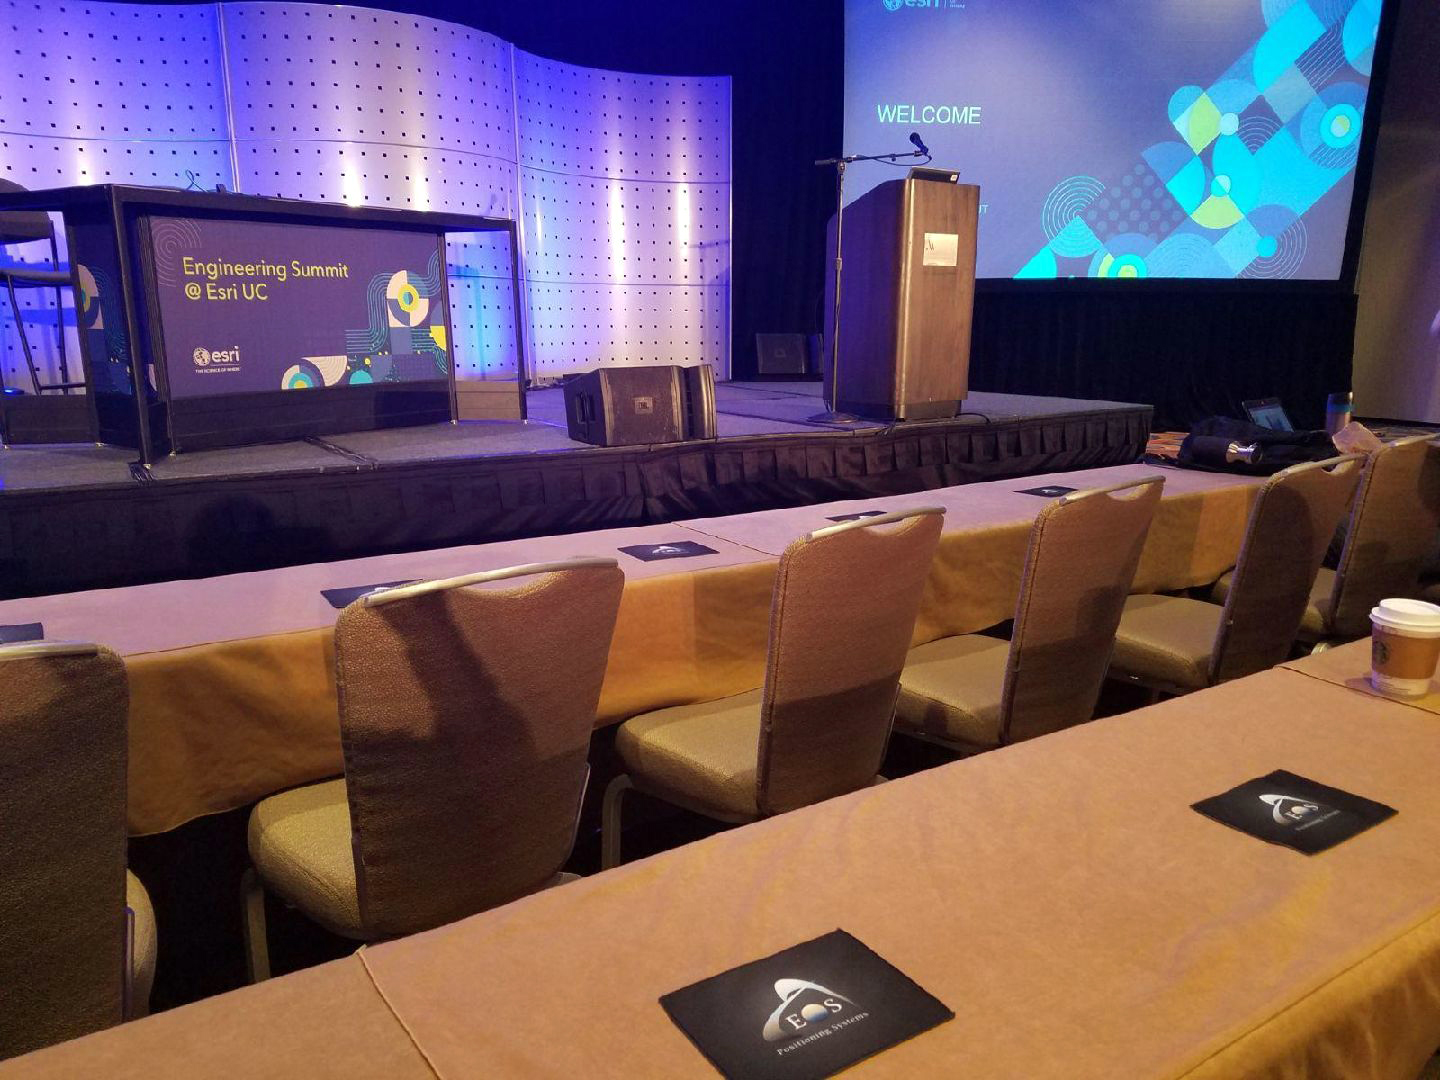 Engineering SUmmit at Esri UC User Conference engineering Eos Positioning Systems sponsor